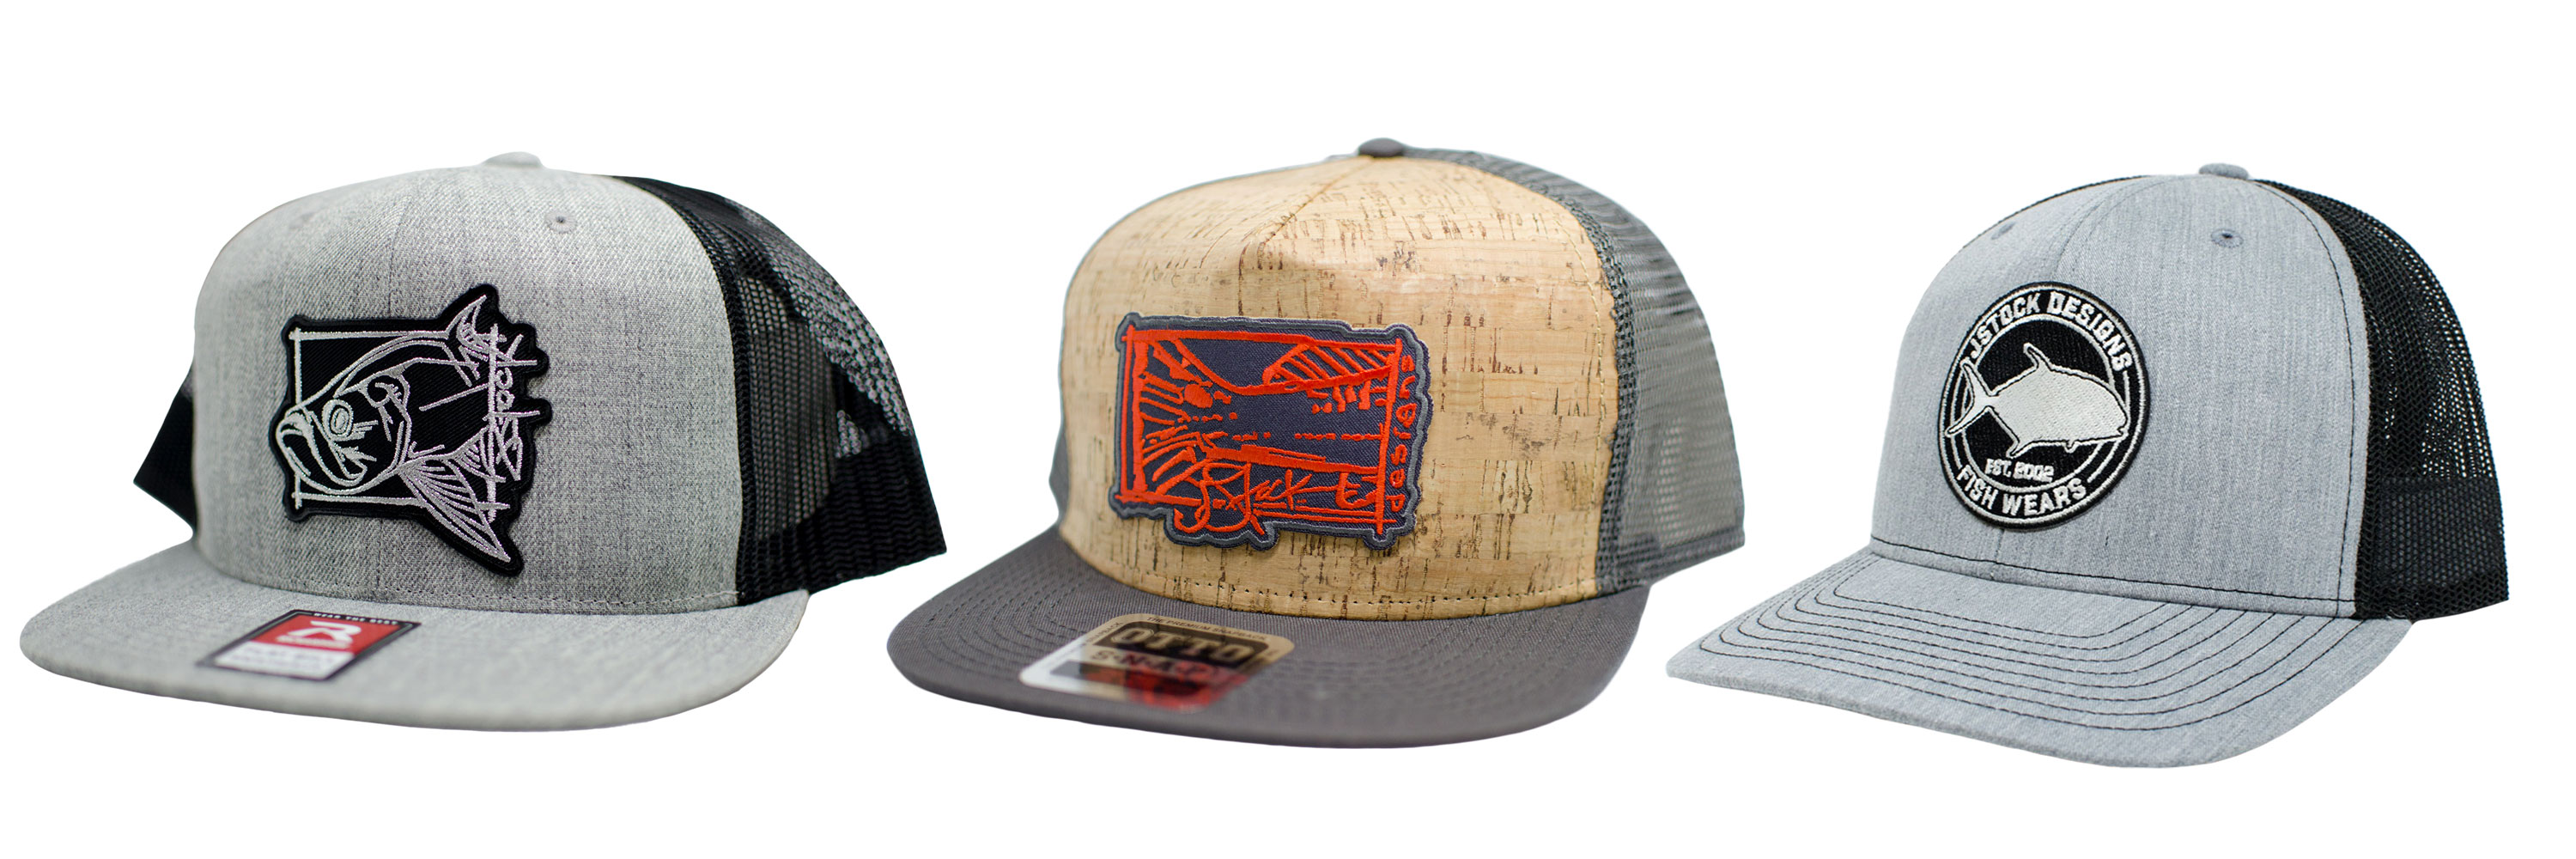 A few examples of hats with patches affixed.